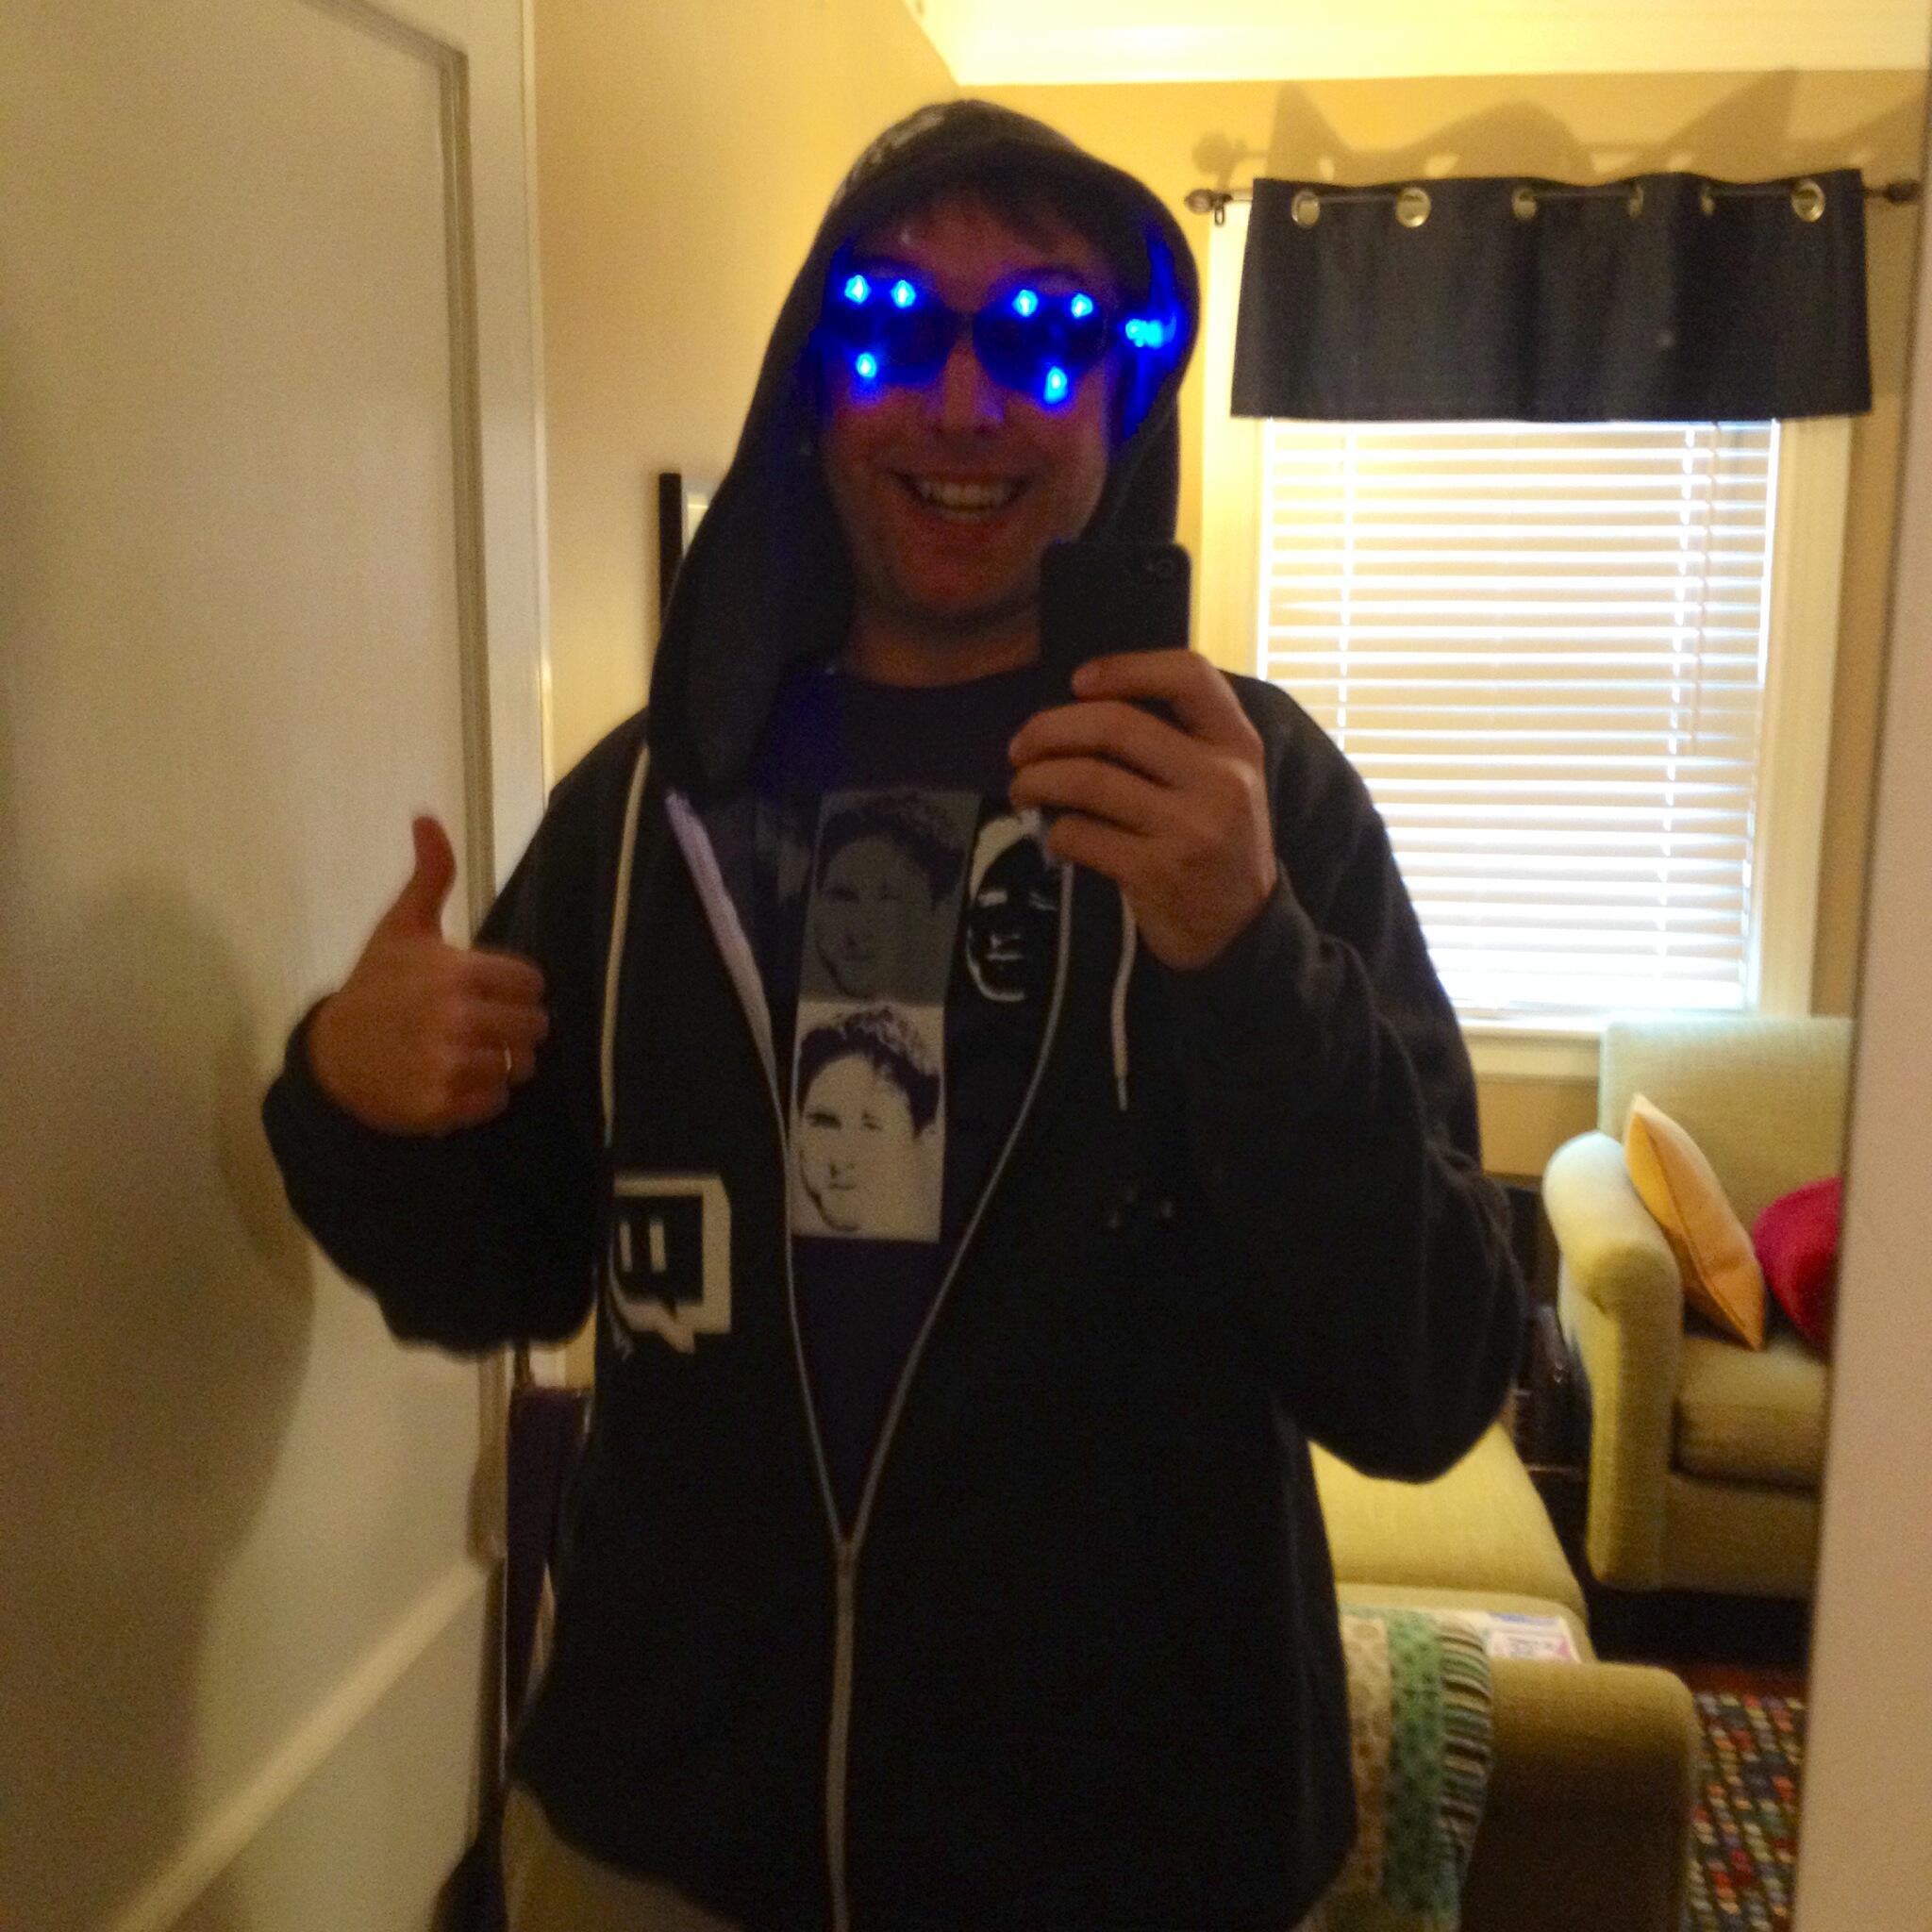 Curtis Scott On Twitter Got My Twitch Swag Early The T Shirt And Hoodie Are Of Good Quality Get Yours At Http T Co I2tox0ulkj Http T Co Catsf8wrsz [ 2048 x 2048 Pixel ]